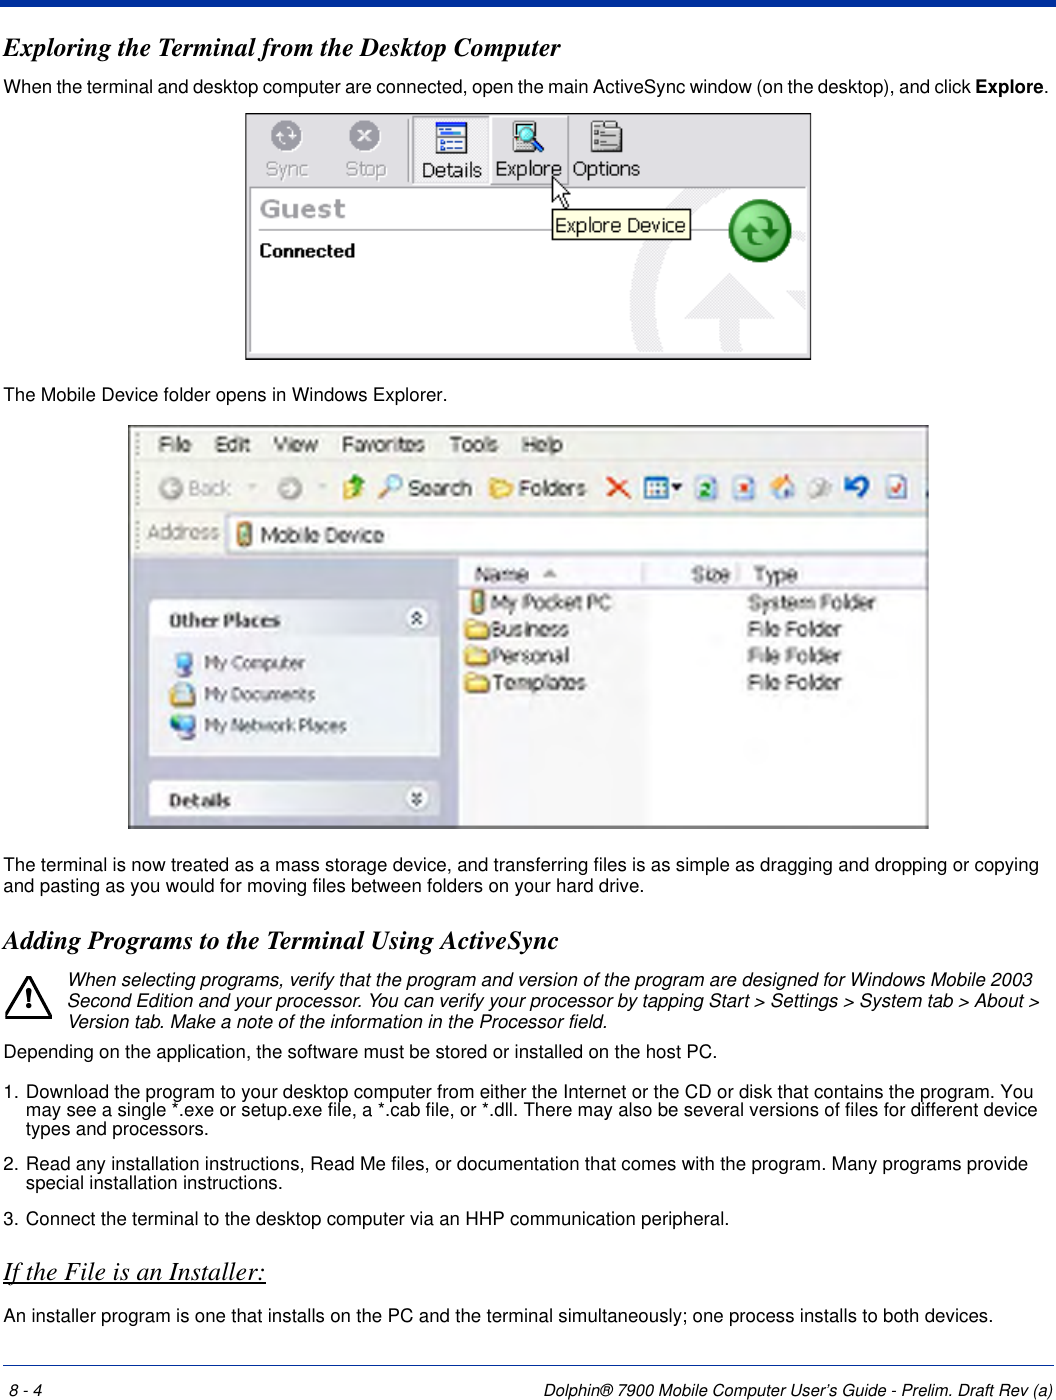 8 - 4 Dolphin® 7900 Mobile Computer User’s Guide - Prelim. Draft Rev (a)Exploring the Terminal from the Desktop ComputerWhen the terminal and desktop computer are connected, open the main ActiveSync window (on the desktop), and click Explore. The Mobile Device folder opens in Windows Explorer. The terminal is now treated as a mass storage device, and transferring files is as simple as dragging and dropping or copying and pasting as you would for moving files between folders on your hard drive.Adding Programs to the Terminal Using ActiveSyncWhen selecting programs, verify that the program and version of the program are designed for Windows Mobile 2003 Second Edition and your processor. You can verify your processor by tapping Start &gt; Settings &gt; System tab &gt; About &gt; Version tab. Make a note of the information in the Processor field. Depending on the application, the software must be stored or installed on the host PC. 1. Download the program to your desktop computer from either the Internet or the CD or disk that contains the program. You may see a single *.exe or setup.exe file, a *.cab file, or *.dll. There may also be several versions of files for different device types and processors.2. Read any installation instructions, Read Me files, or documentation that comes with the program. Many programs provide special installation instructions.3. Connect the terminal to the desktop computer via an HHP communication peripheral.If the File is an Installer:An installer program is one that installs on the PC and the terminal simultaneously; one process installs to both devices.!